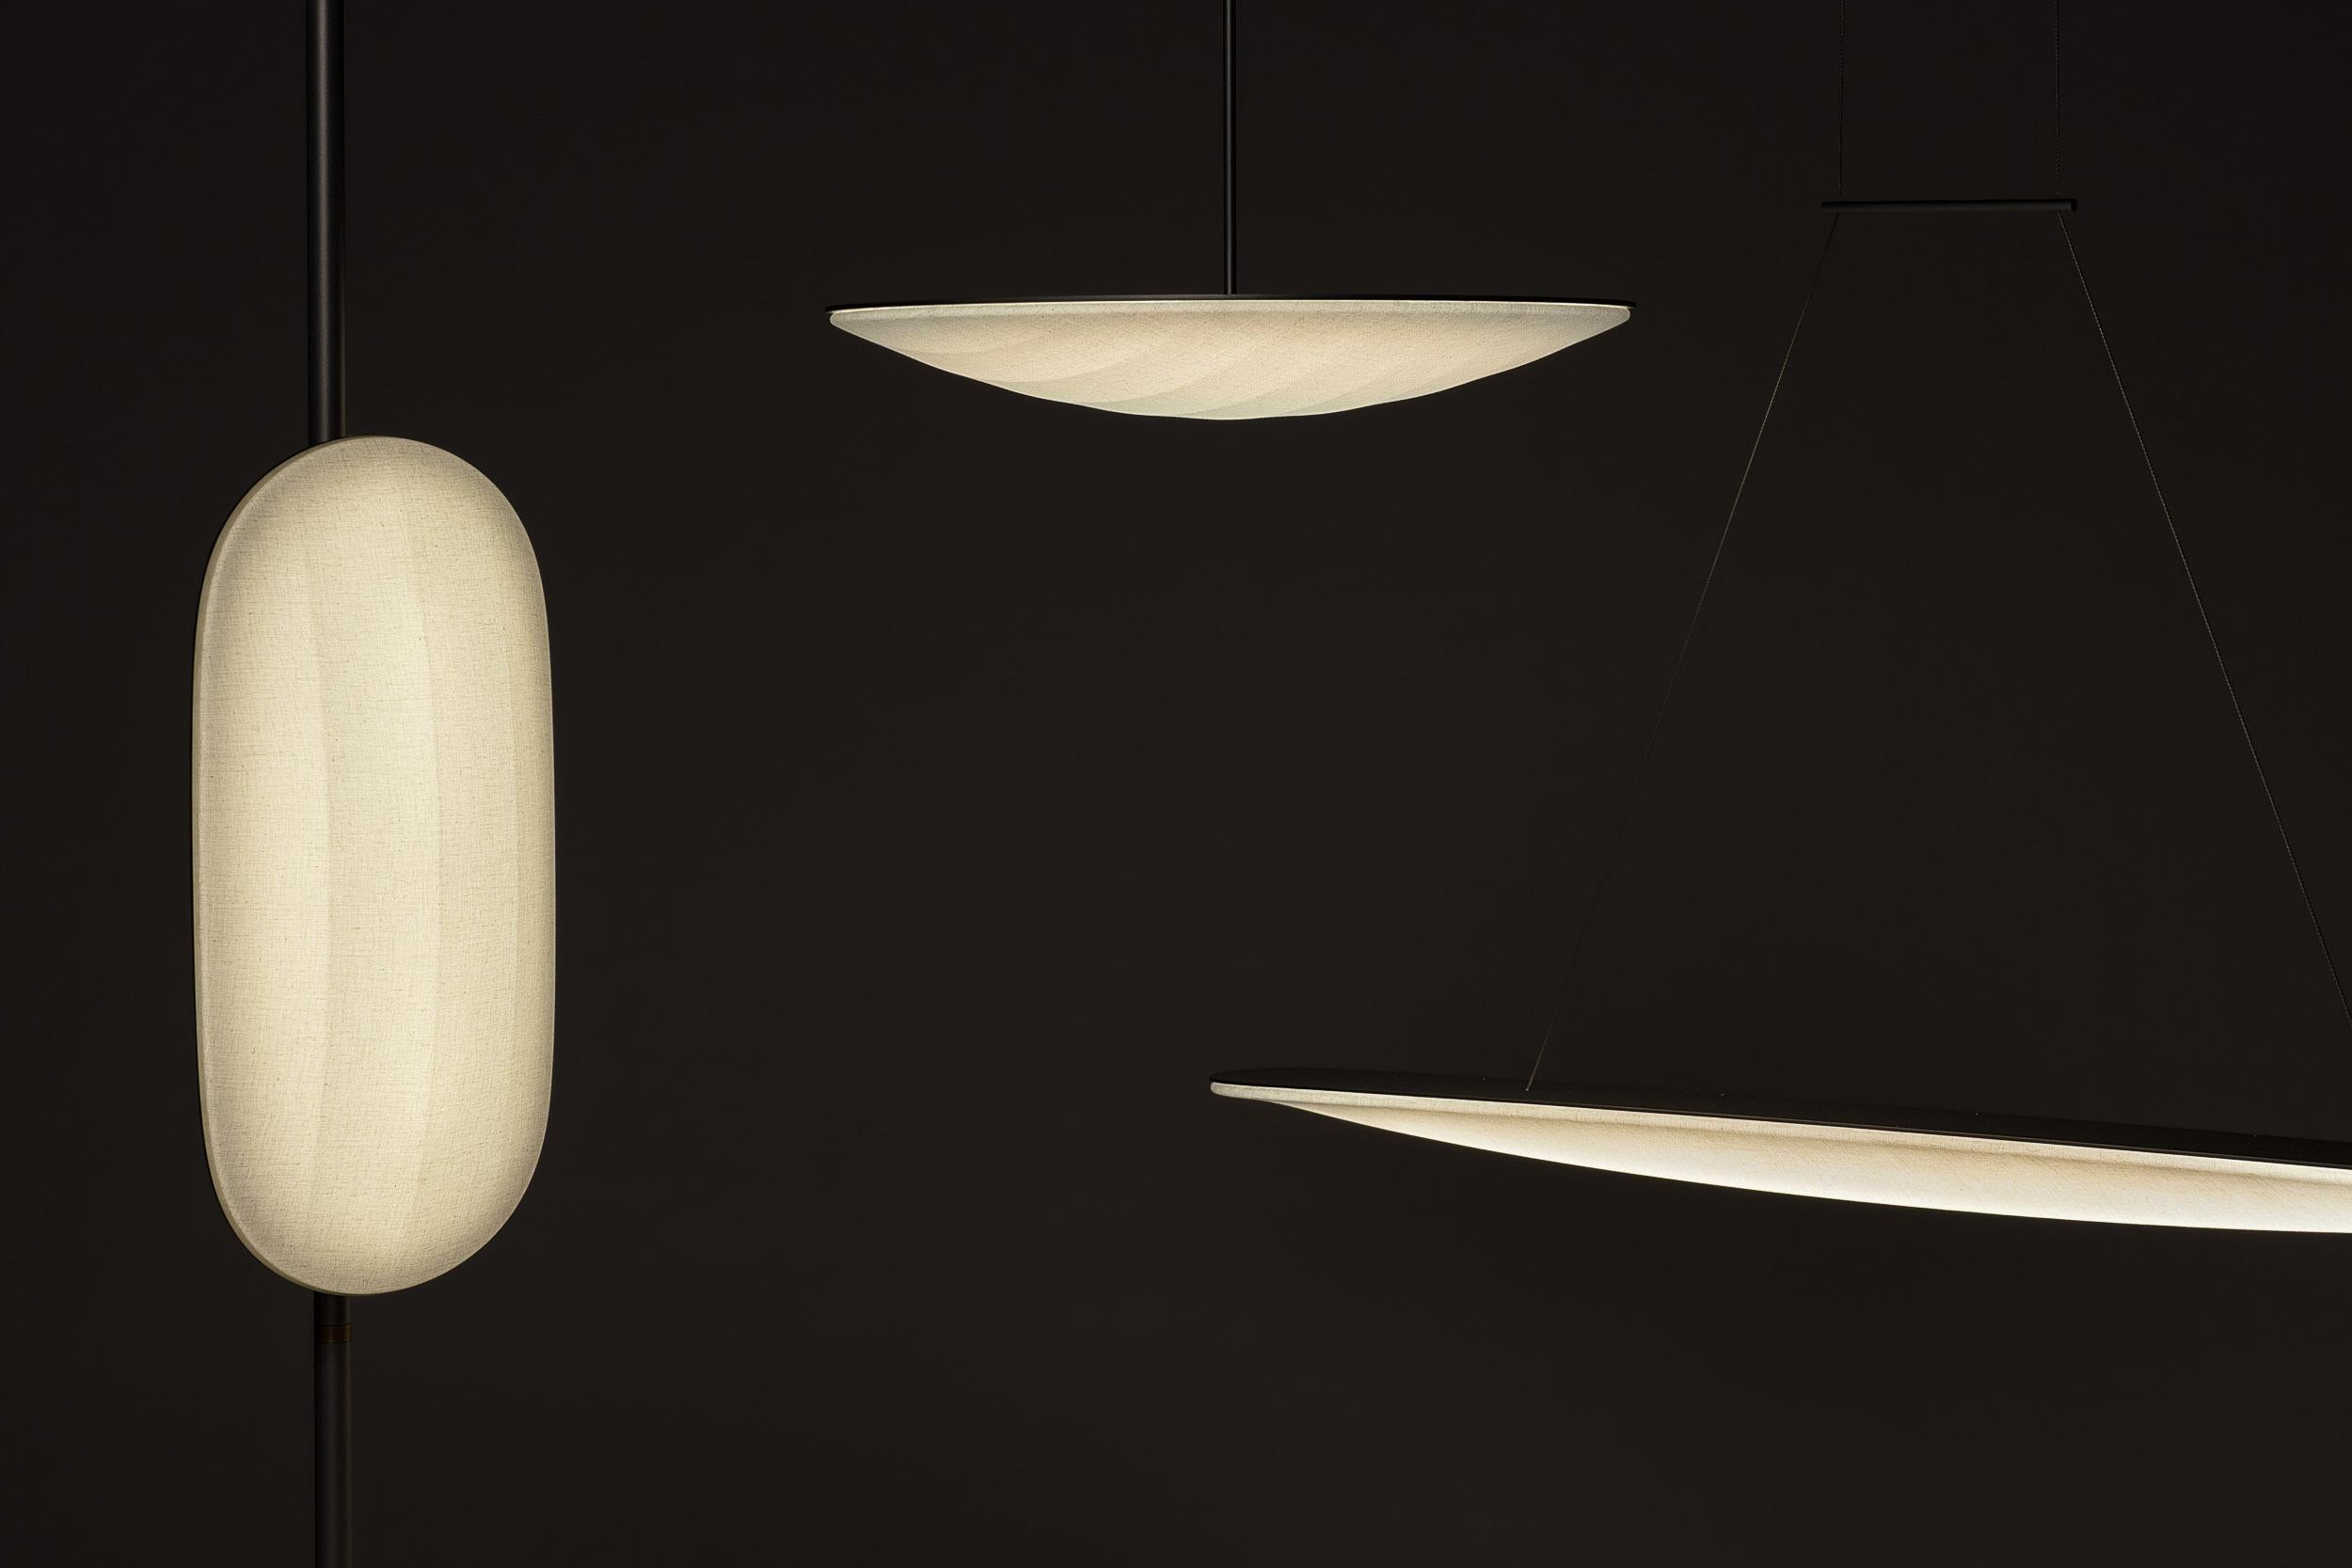 Korean Contemporary Pendant Lamp 'Voyage' by Bymars x AGO For Sale